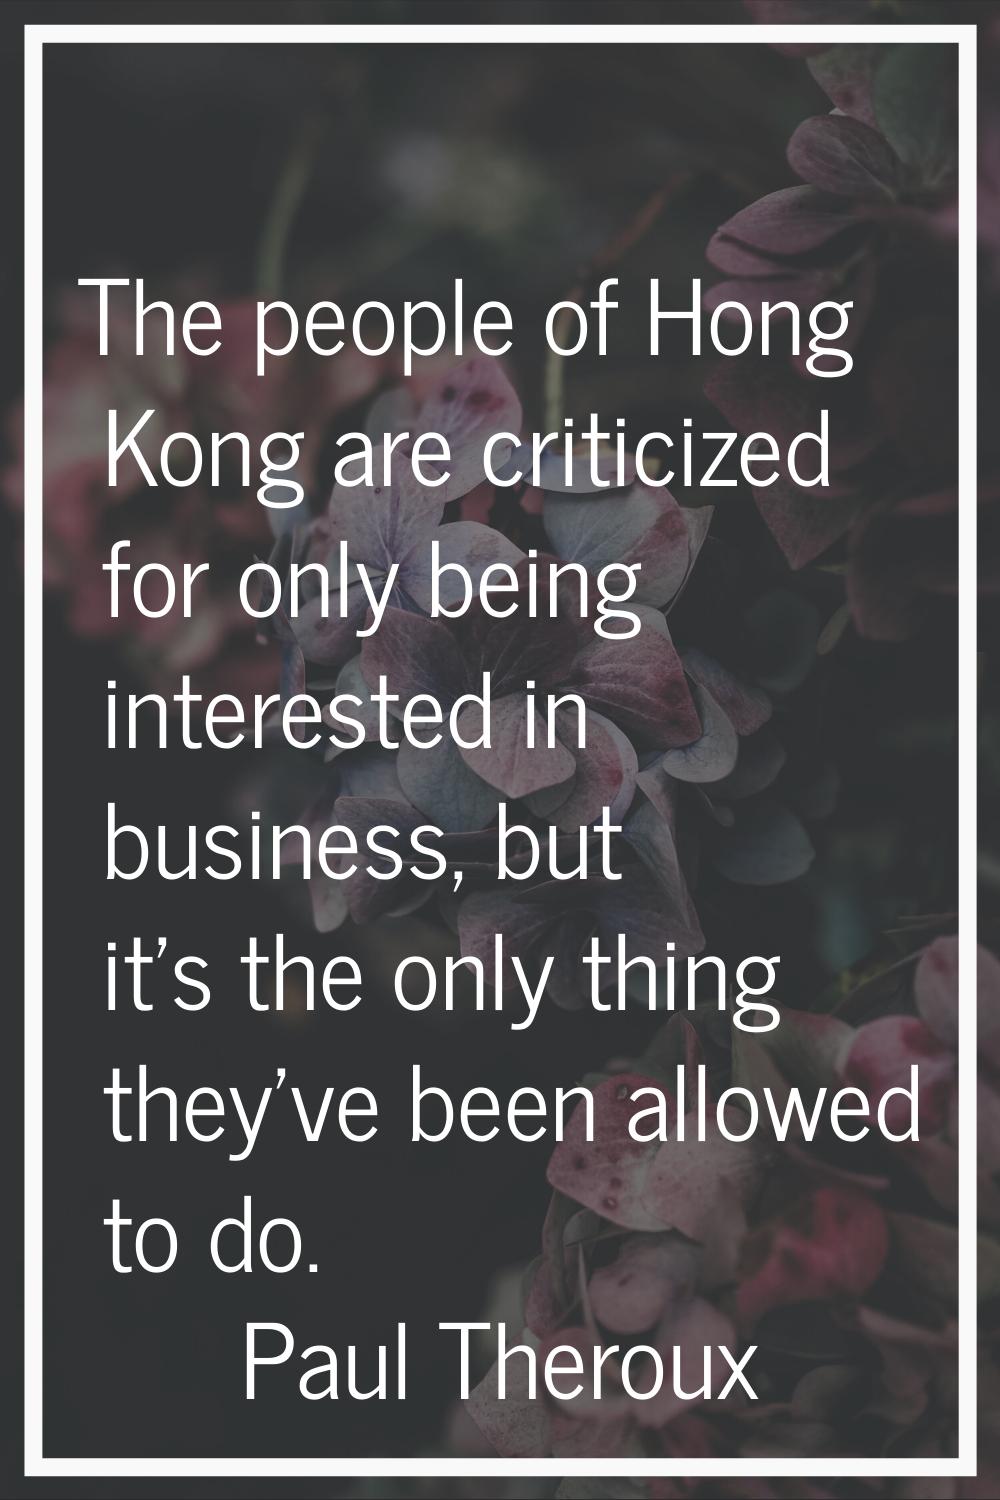 The people of Hong Kong are criticized for only being interested in business, but it's the only thi